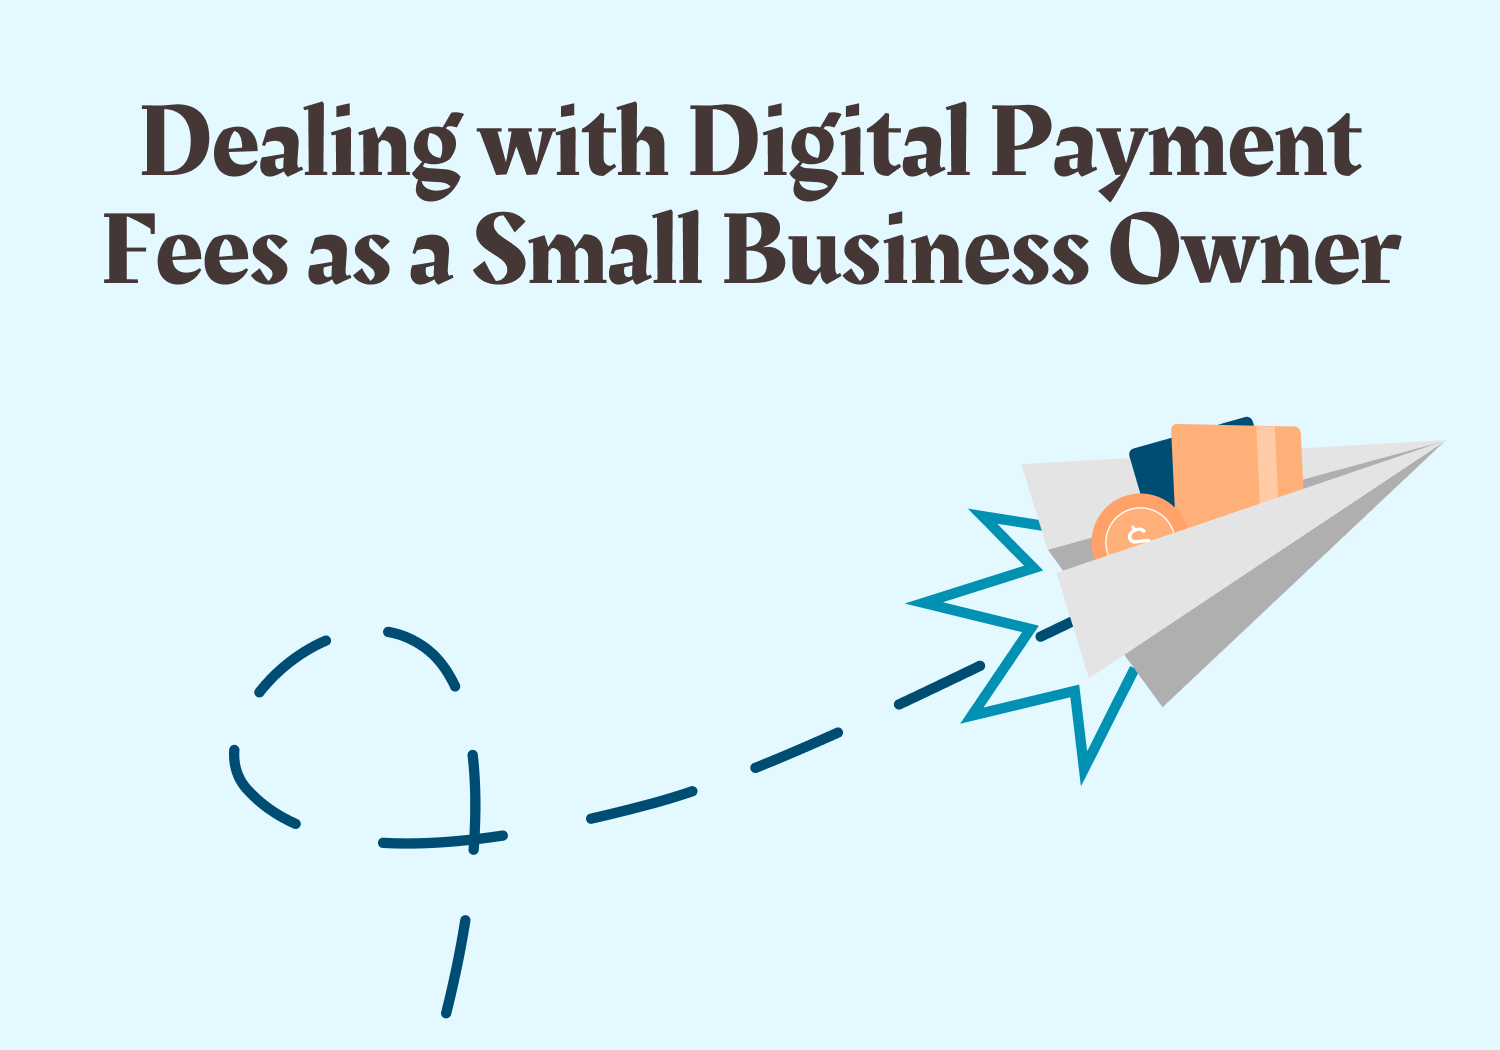 Dealing with digital payment fees as a small business owner